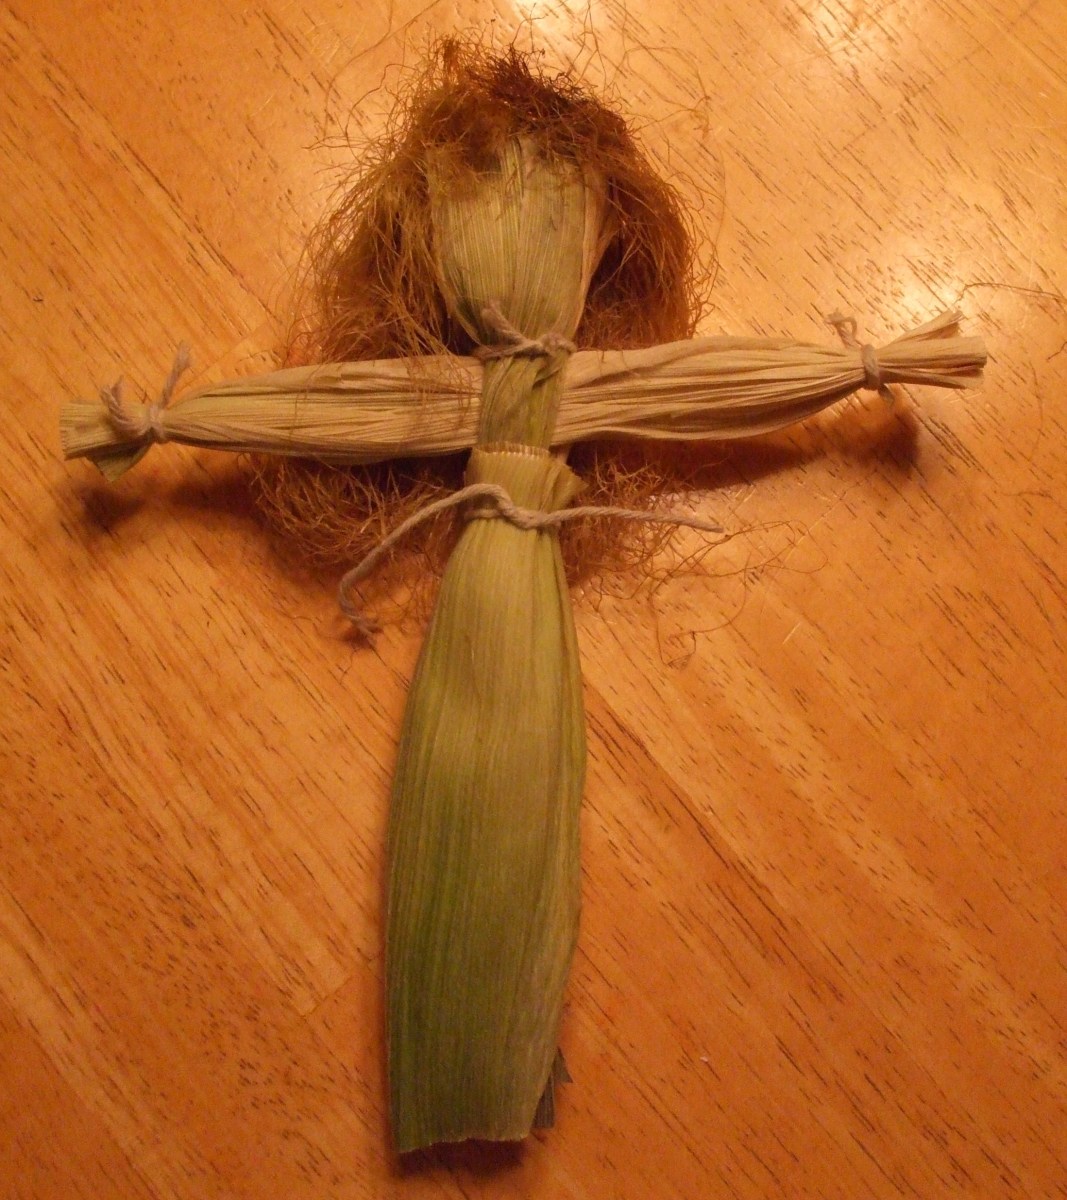 How to Make Corn Husk Dolls Step-by-Step With Photos